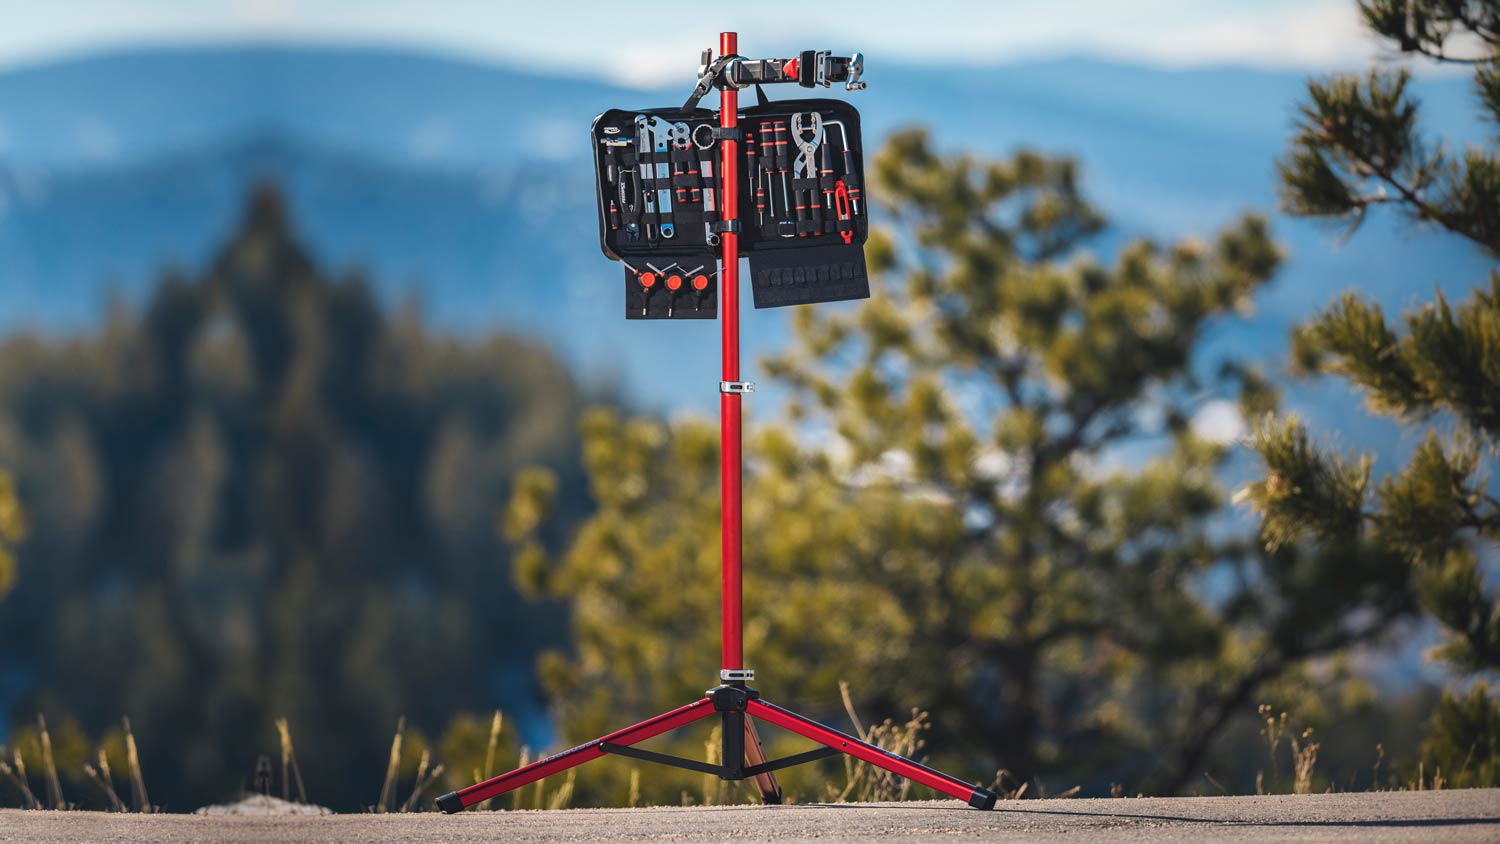 Feedback introduces new Pro Mechanic Repair Stand